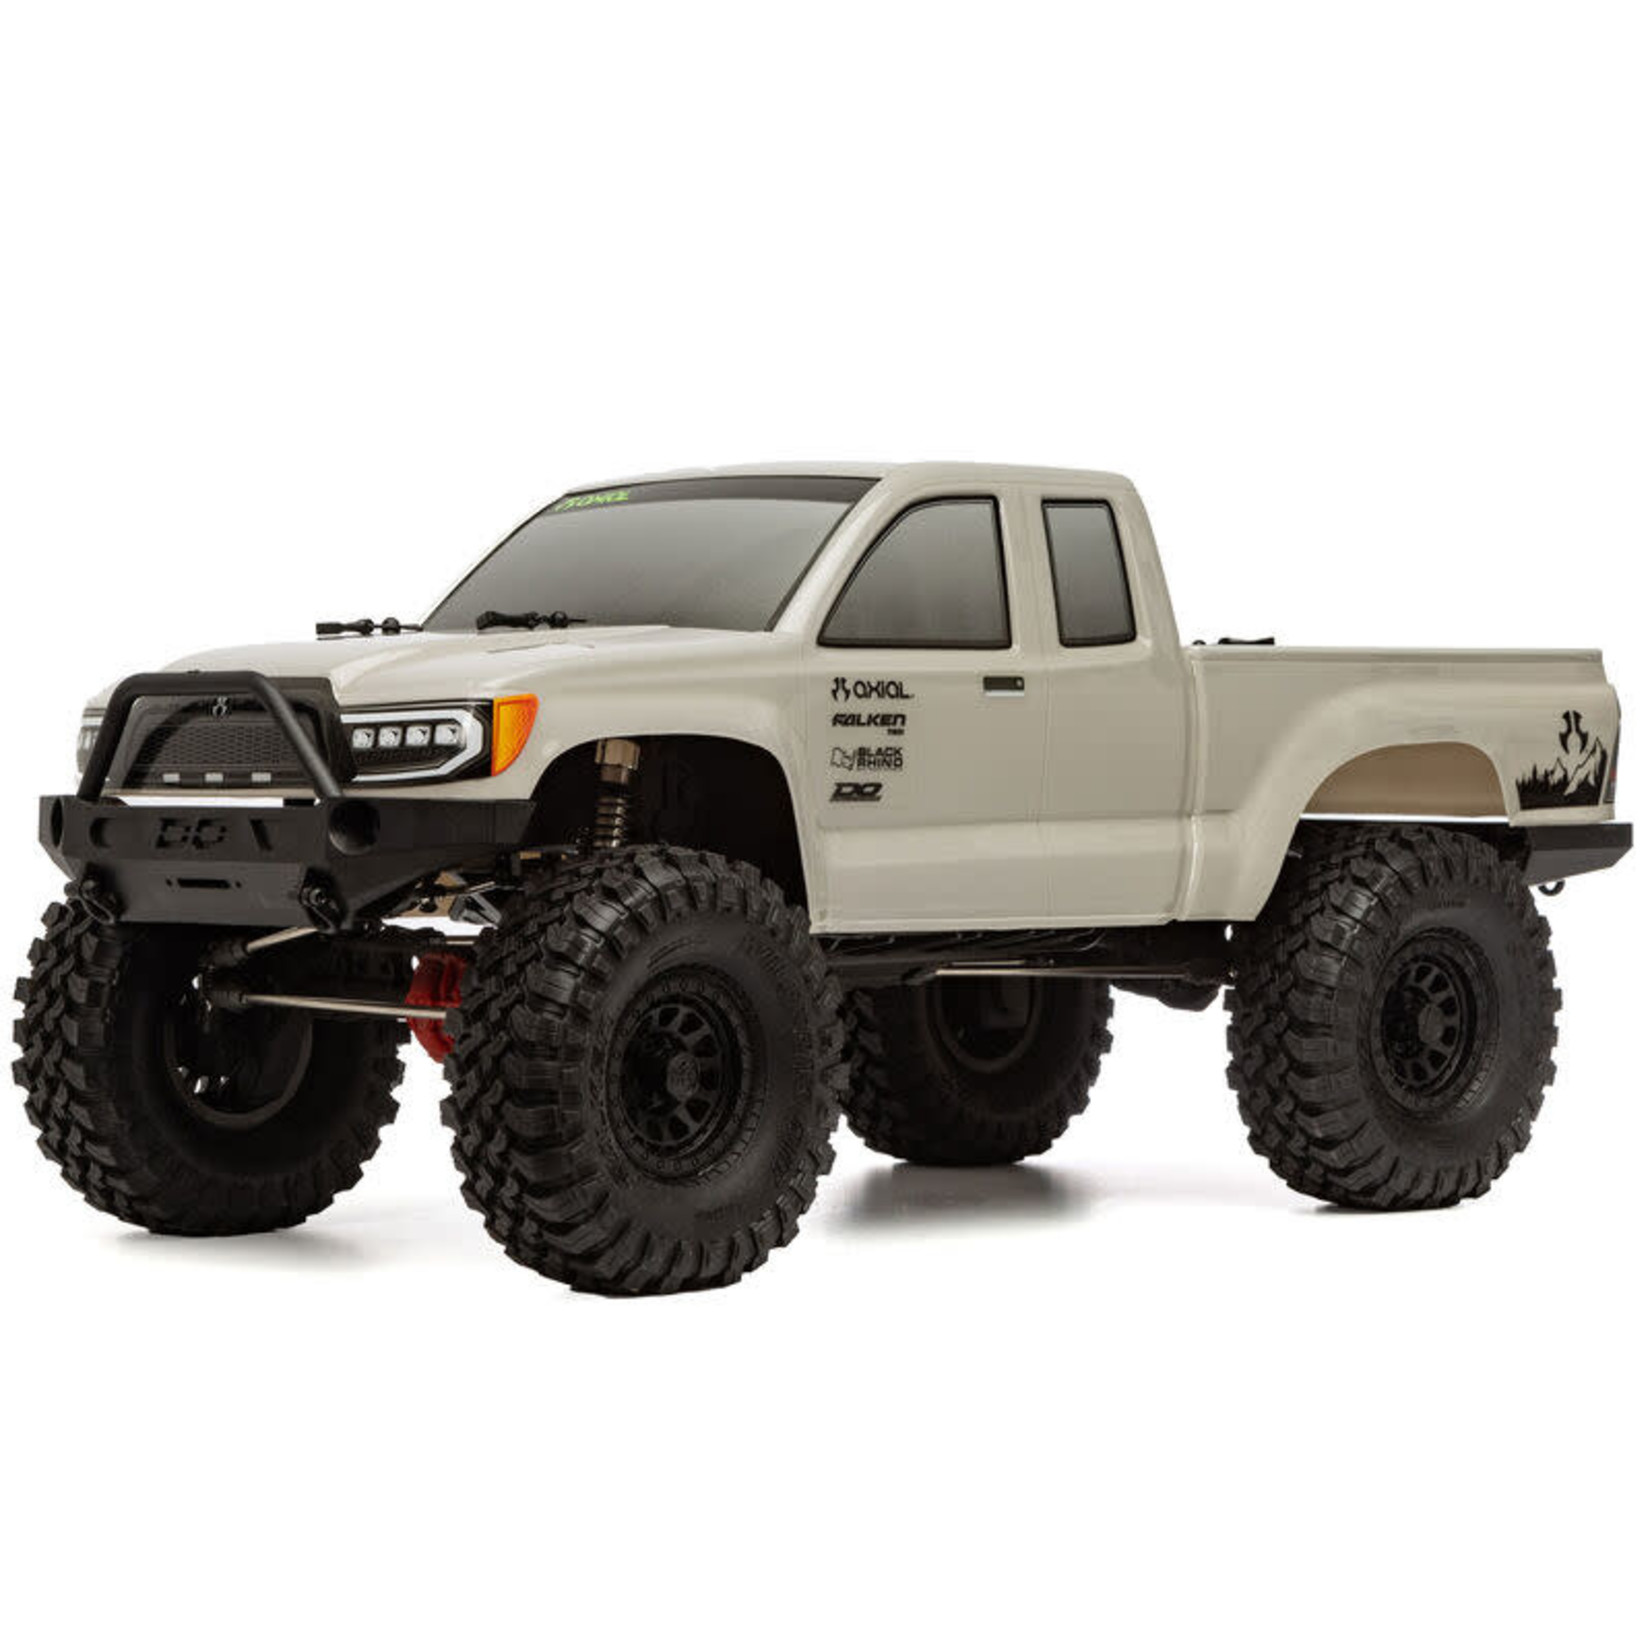 AXIAL SCX10 III Base Camp 1/10th 4WD RTR Gray